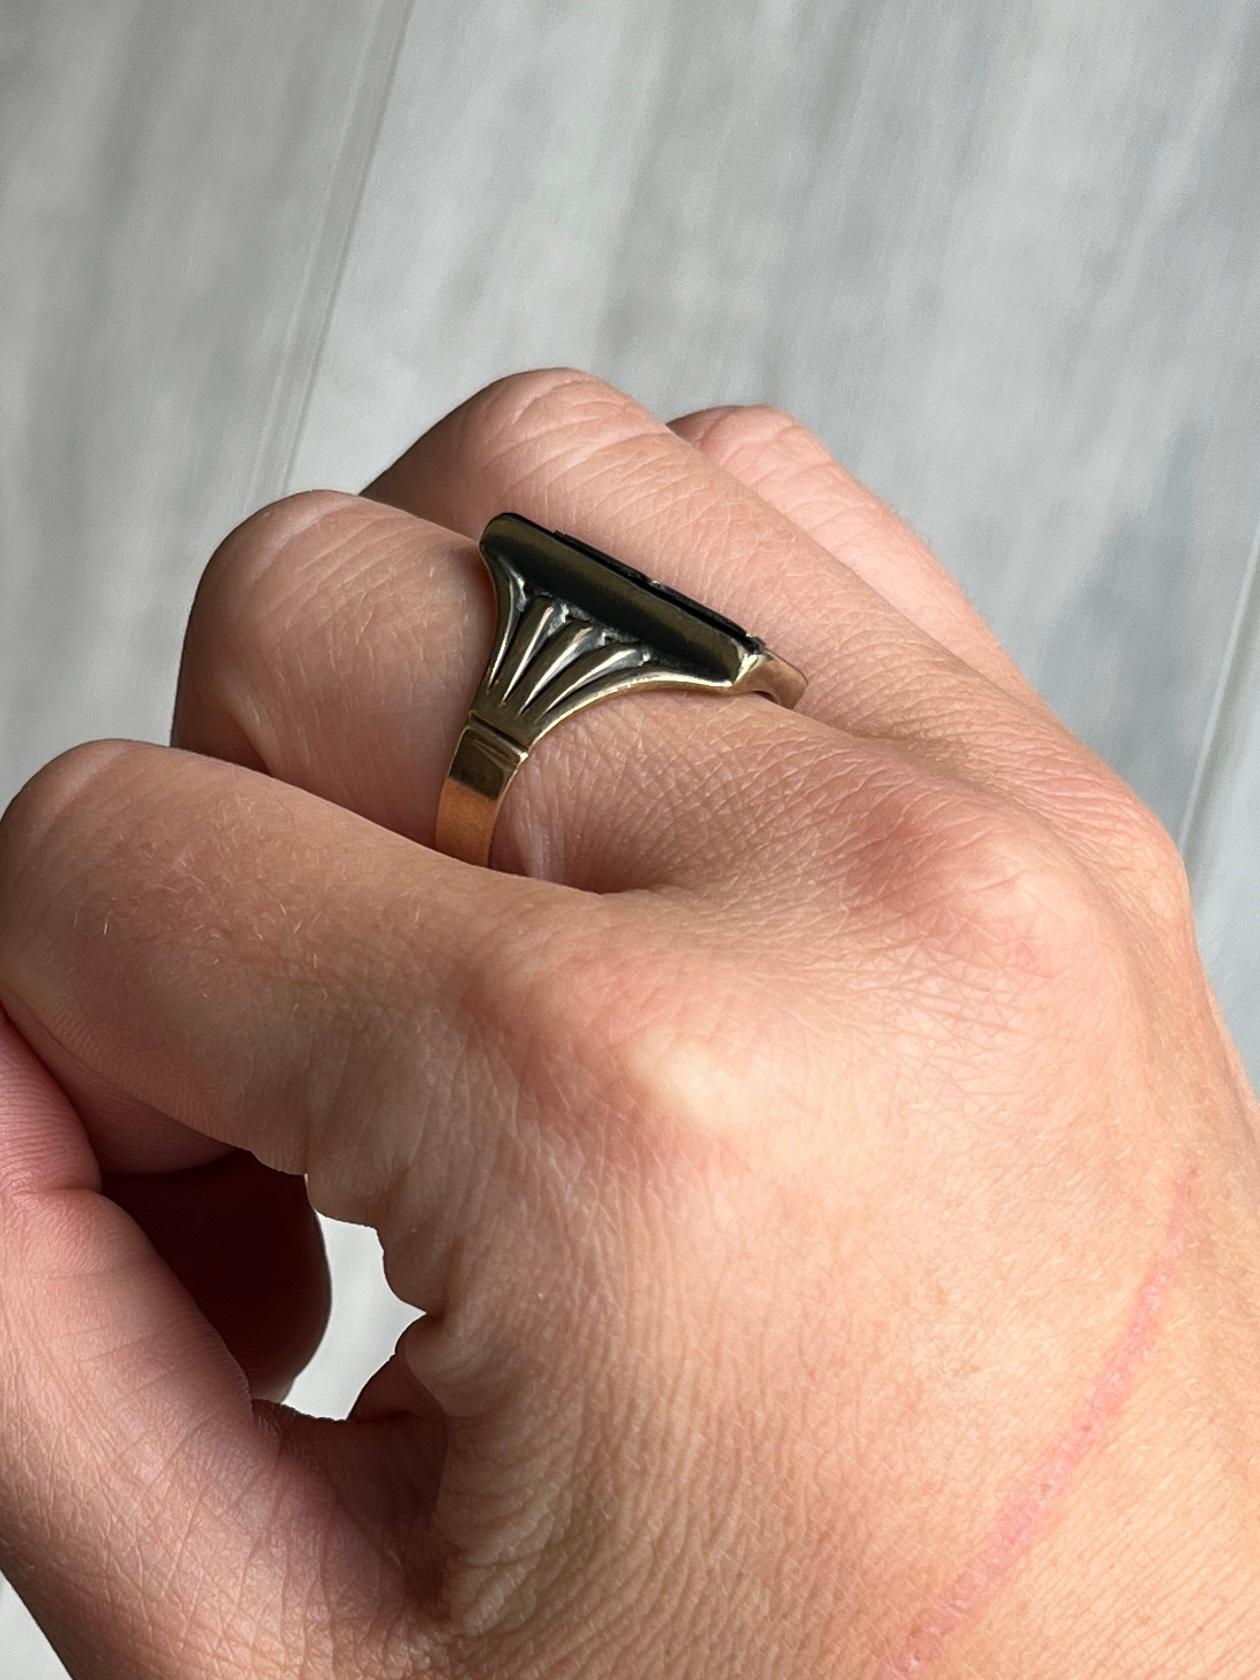 This ring holds a rectangular onyx stone which has the letter 'D' which lays over the top. The shoulders have classic art deco style to them. Modelled in 9carat gold.

Ring Size: Q 1/2 or 8 1/2
Face Dimensions: 19x10mm

Weight: 5.1g